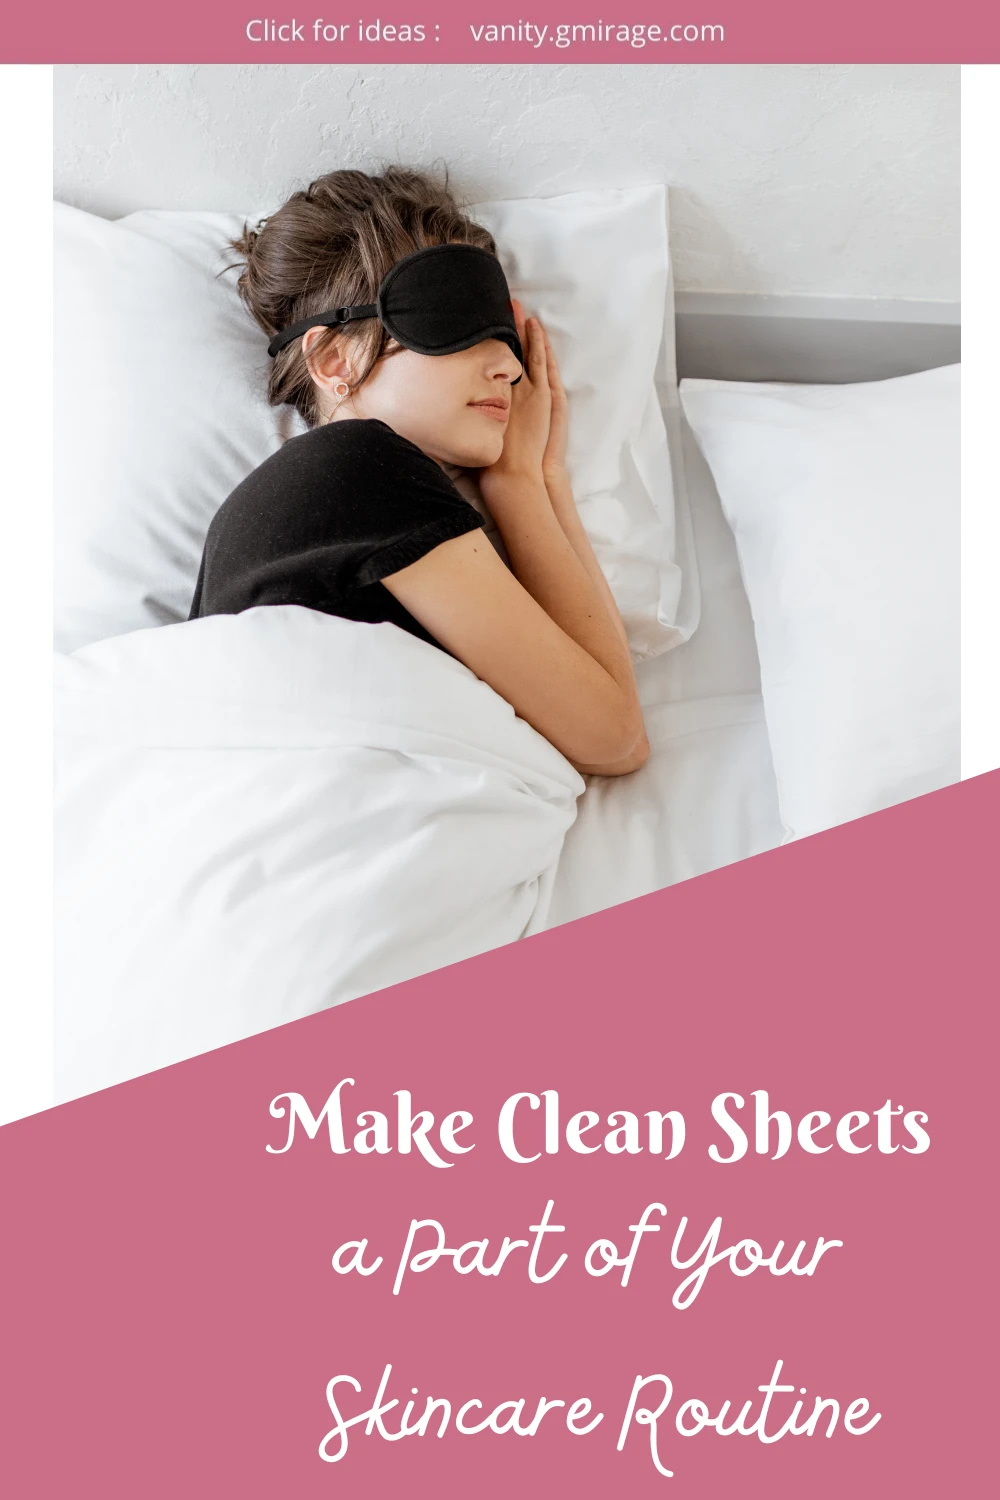 Make Clean Sheets a Part of Your Skincare Routine